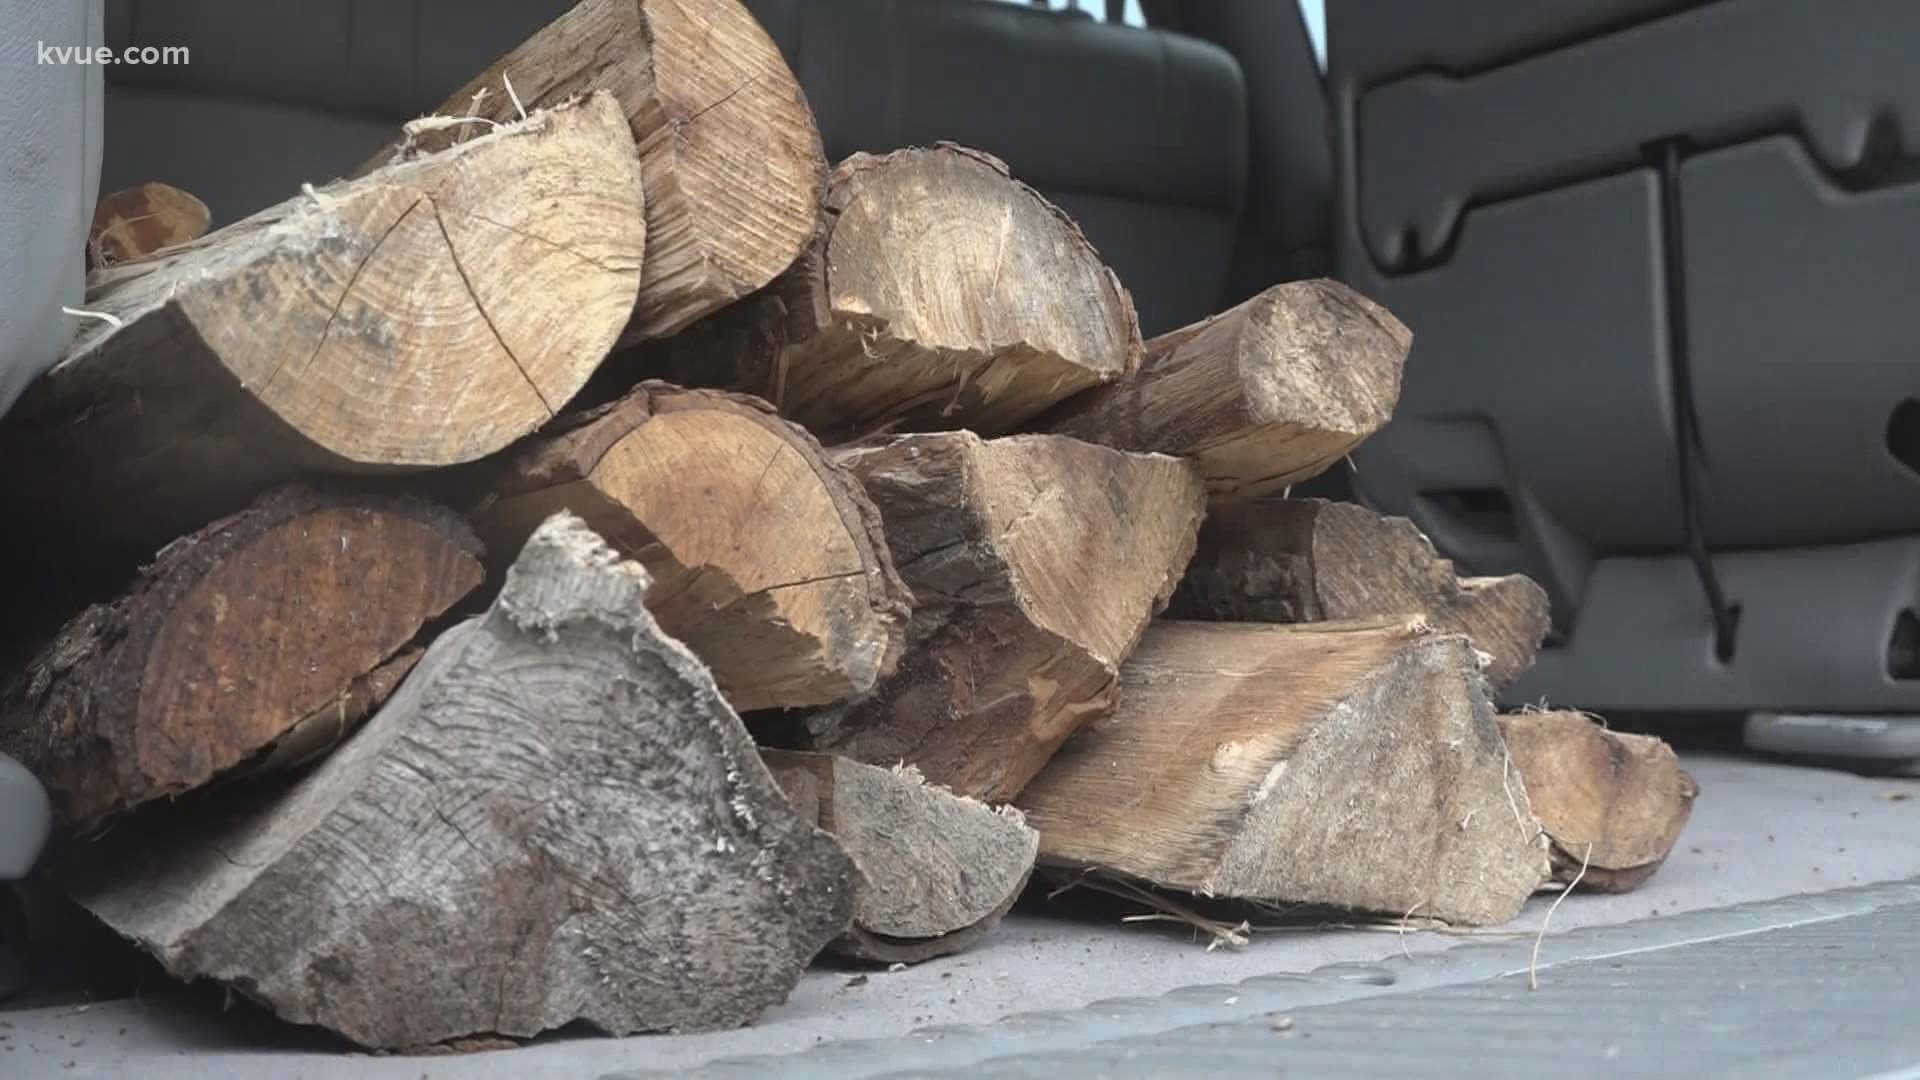 As cold temperatures spread across Central Texas, people are preparing. KVUE's Luis de Leon found that for places that sell firewood, business is booming.